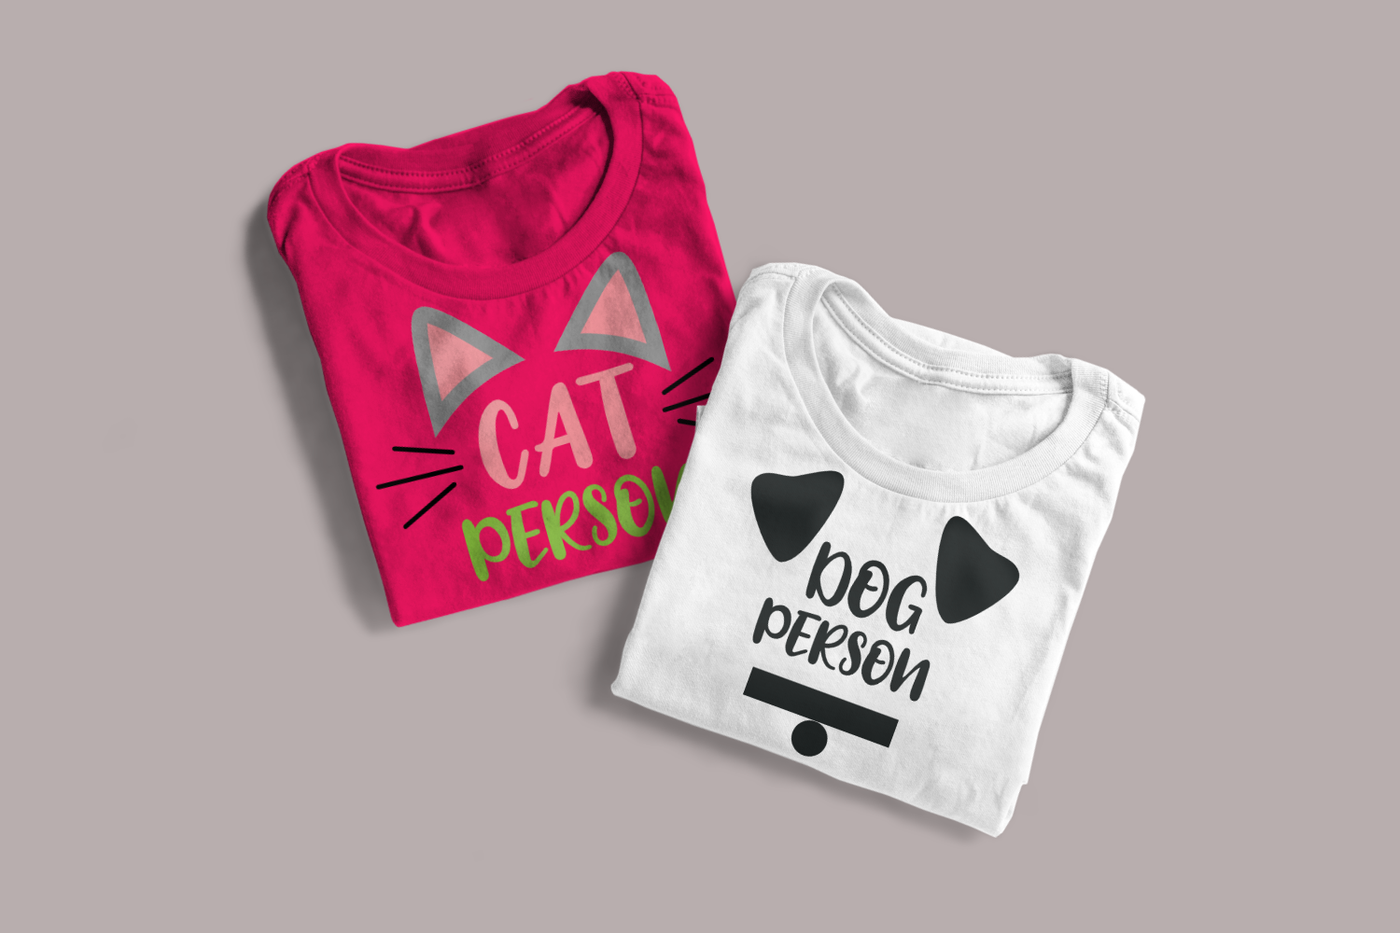 Two folded shirts on a grey background. One shirt says "Cat Person" with cat ears and whiskers, and the other says "Dog person" with dog ears and a collar with tag.